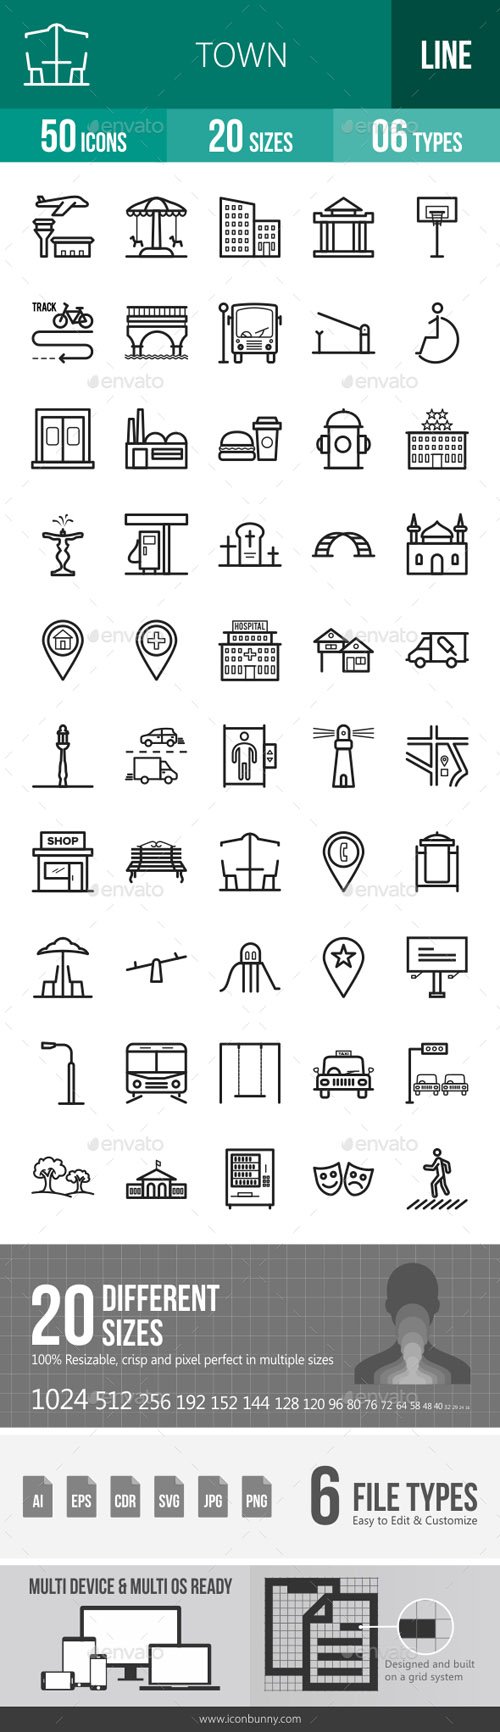 Town Line Icons 18050184